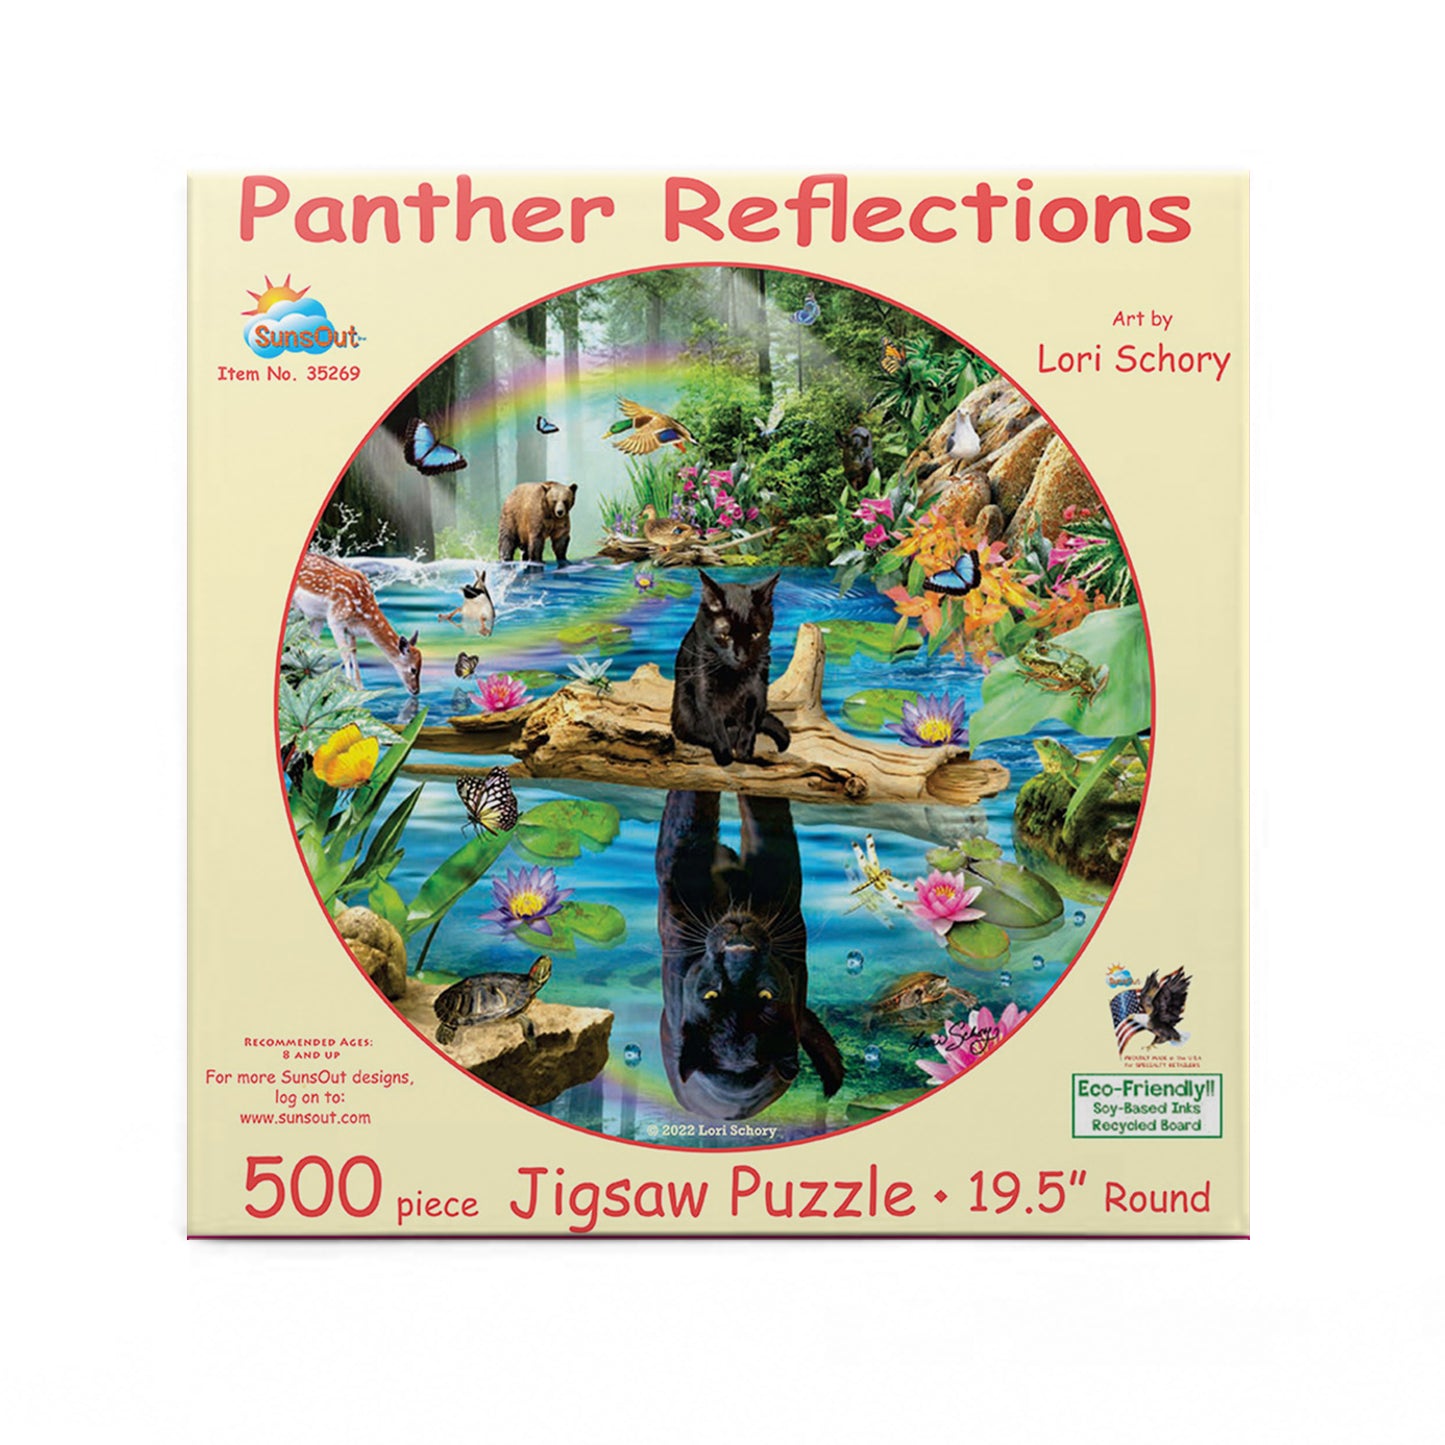 Panther Reflections - 500 Piece Jigsaw Puzzle